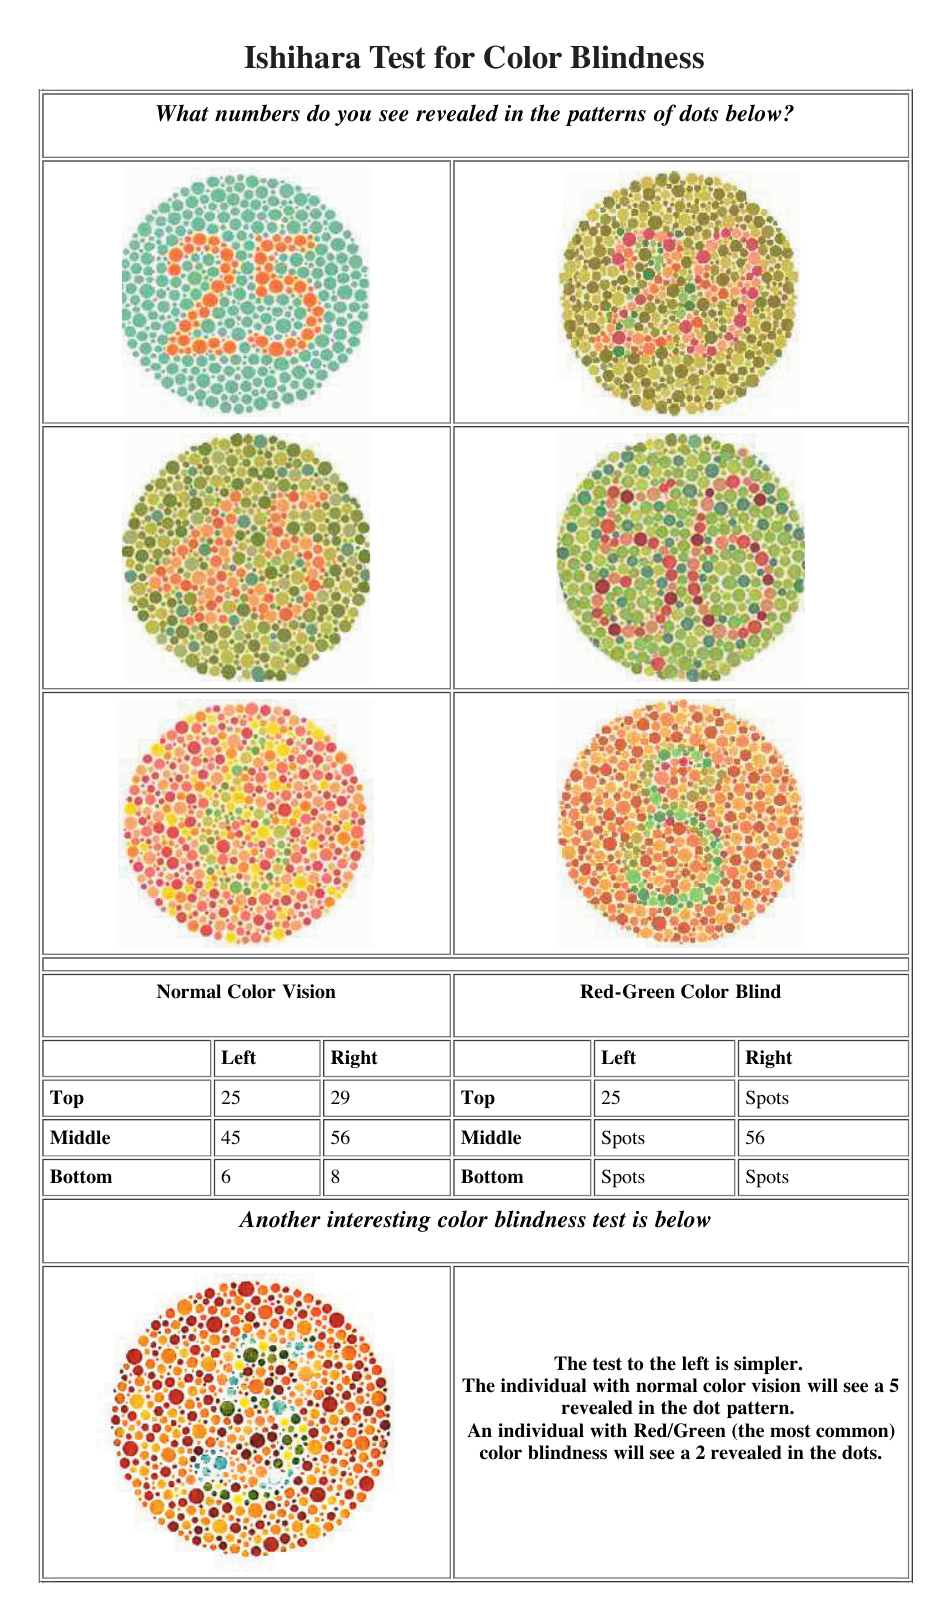 Ishihara Test for Color Blindness Chart - Preview Image